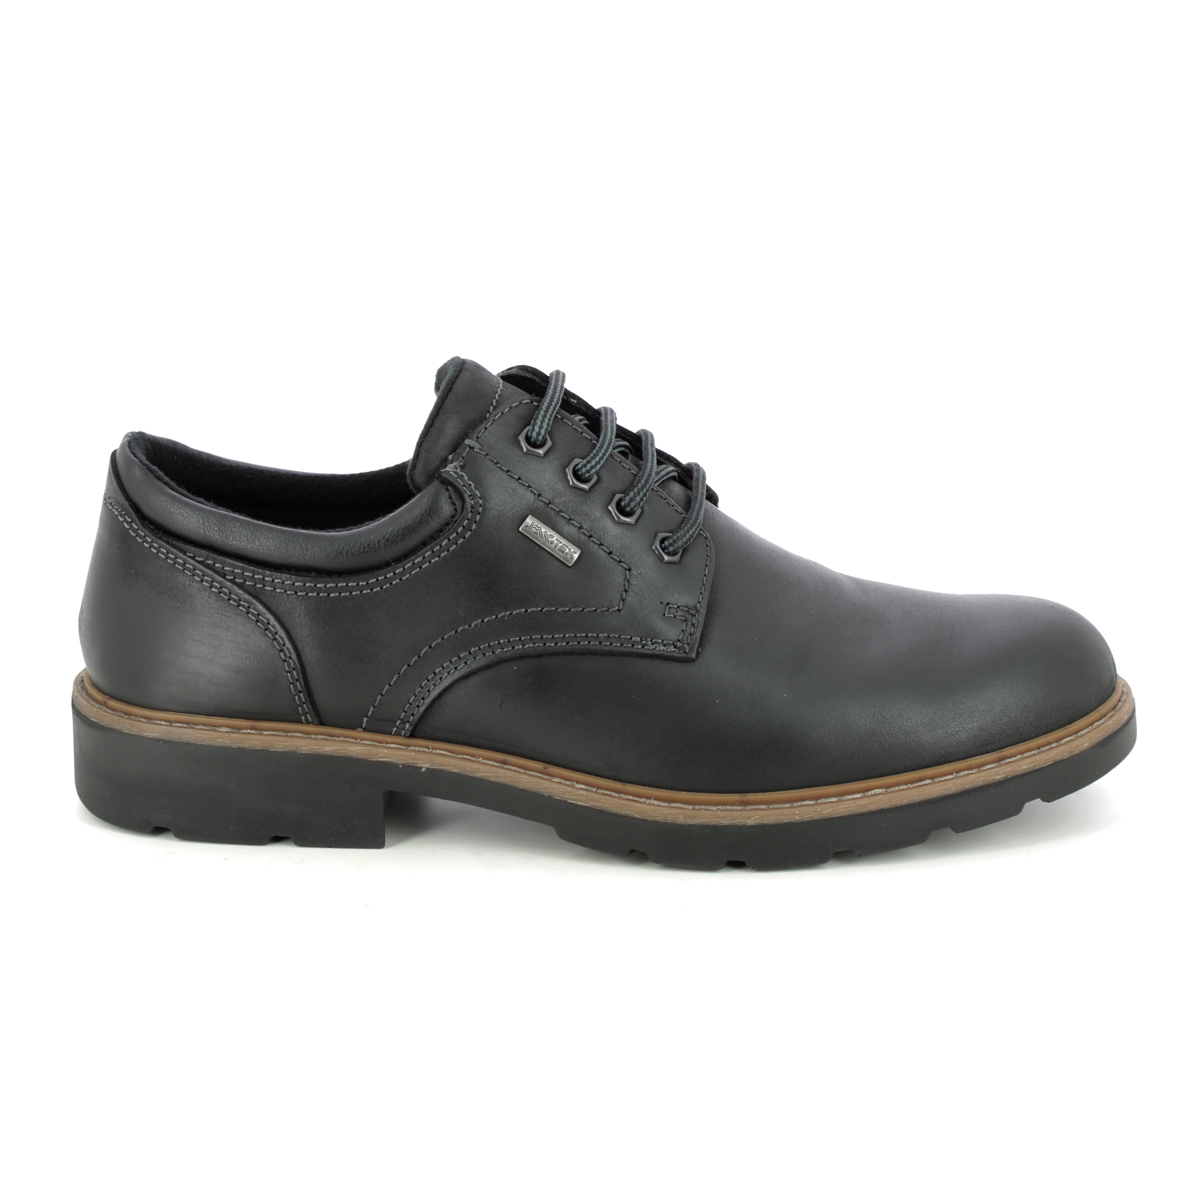 IMAC Countryroad Tex Black leather Mens comfort shoes 0728-3470011